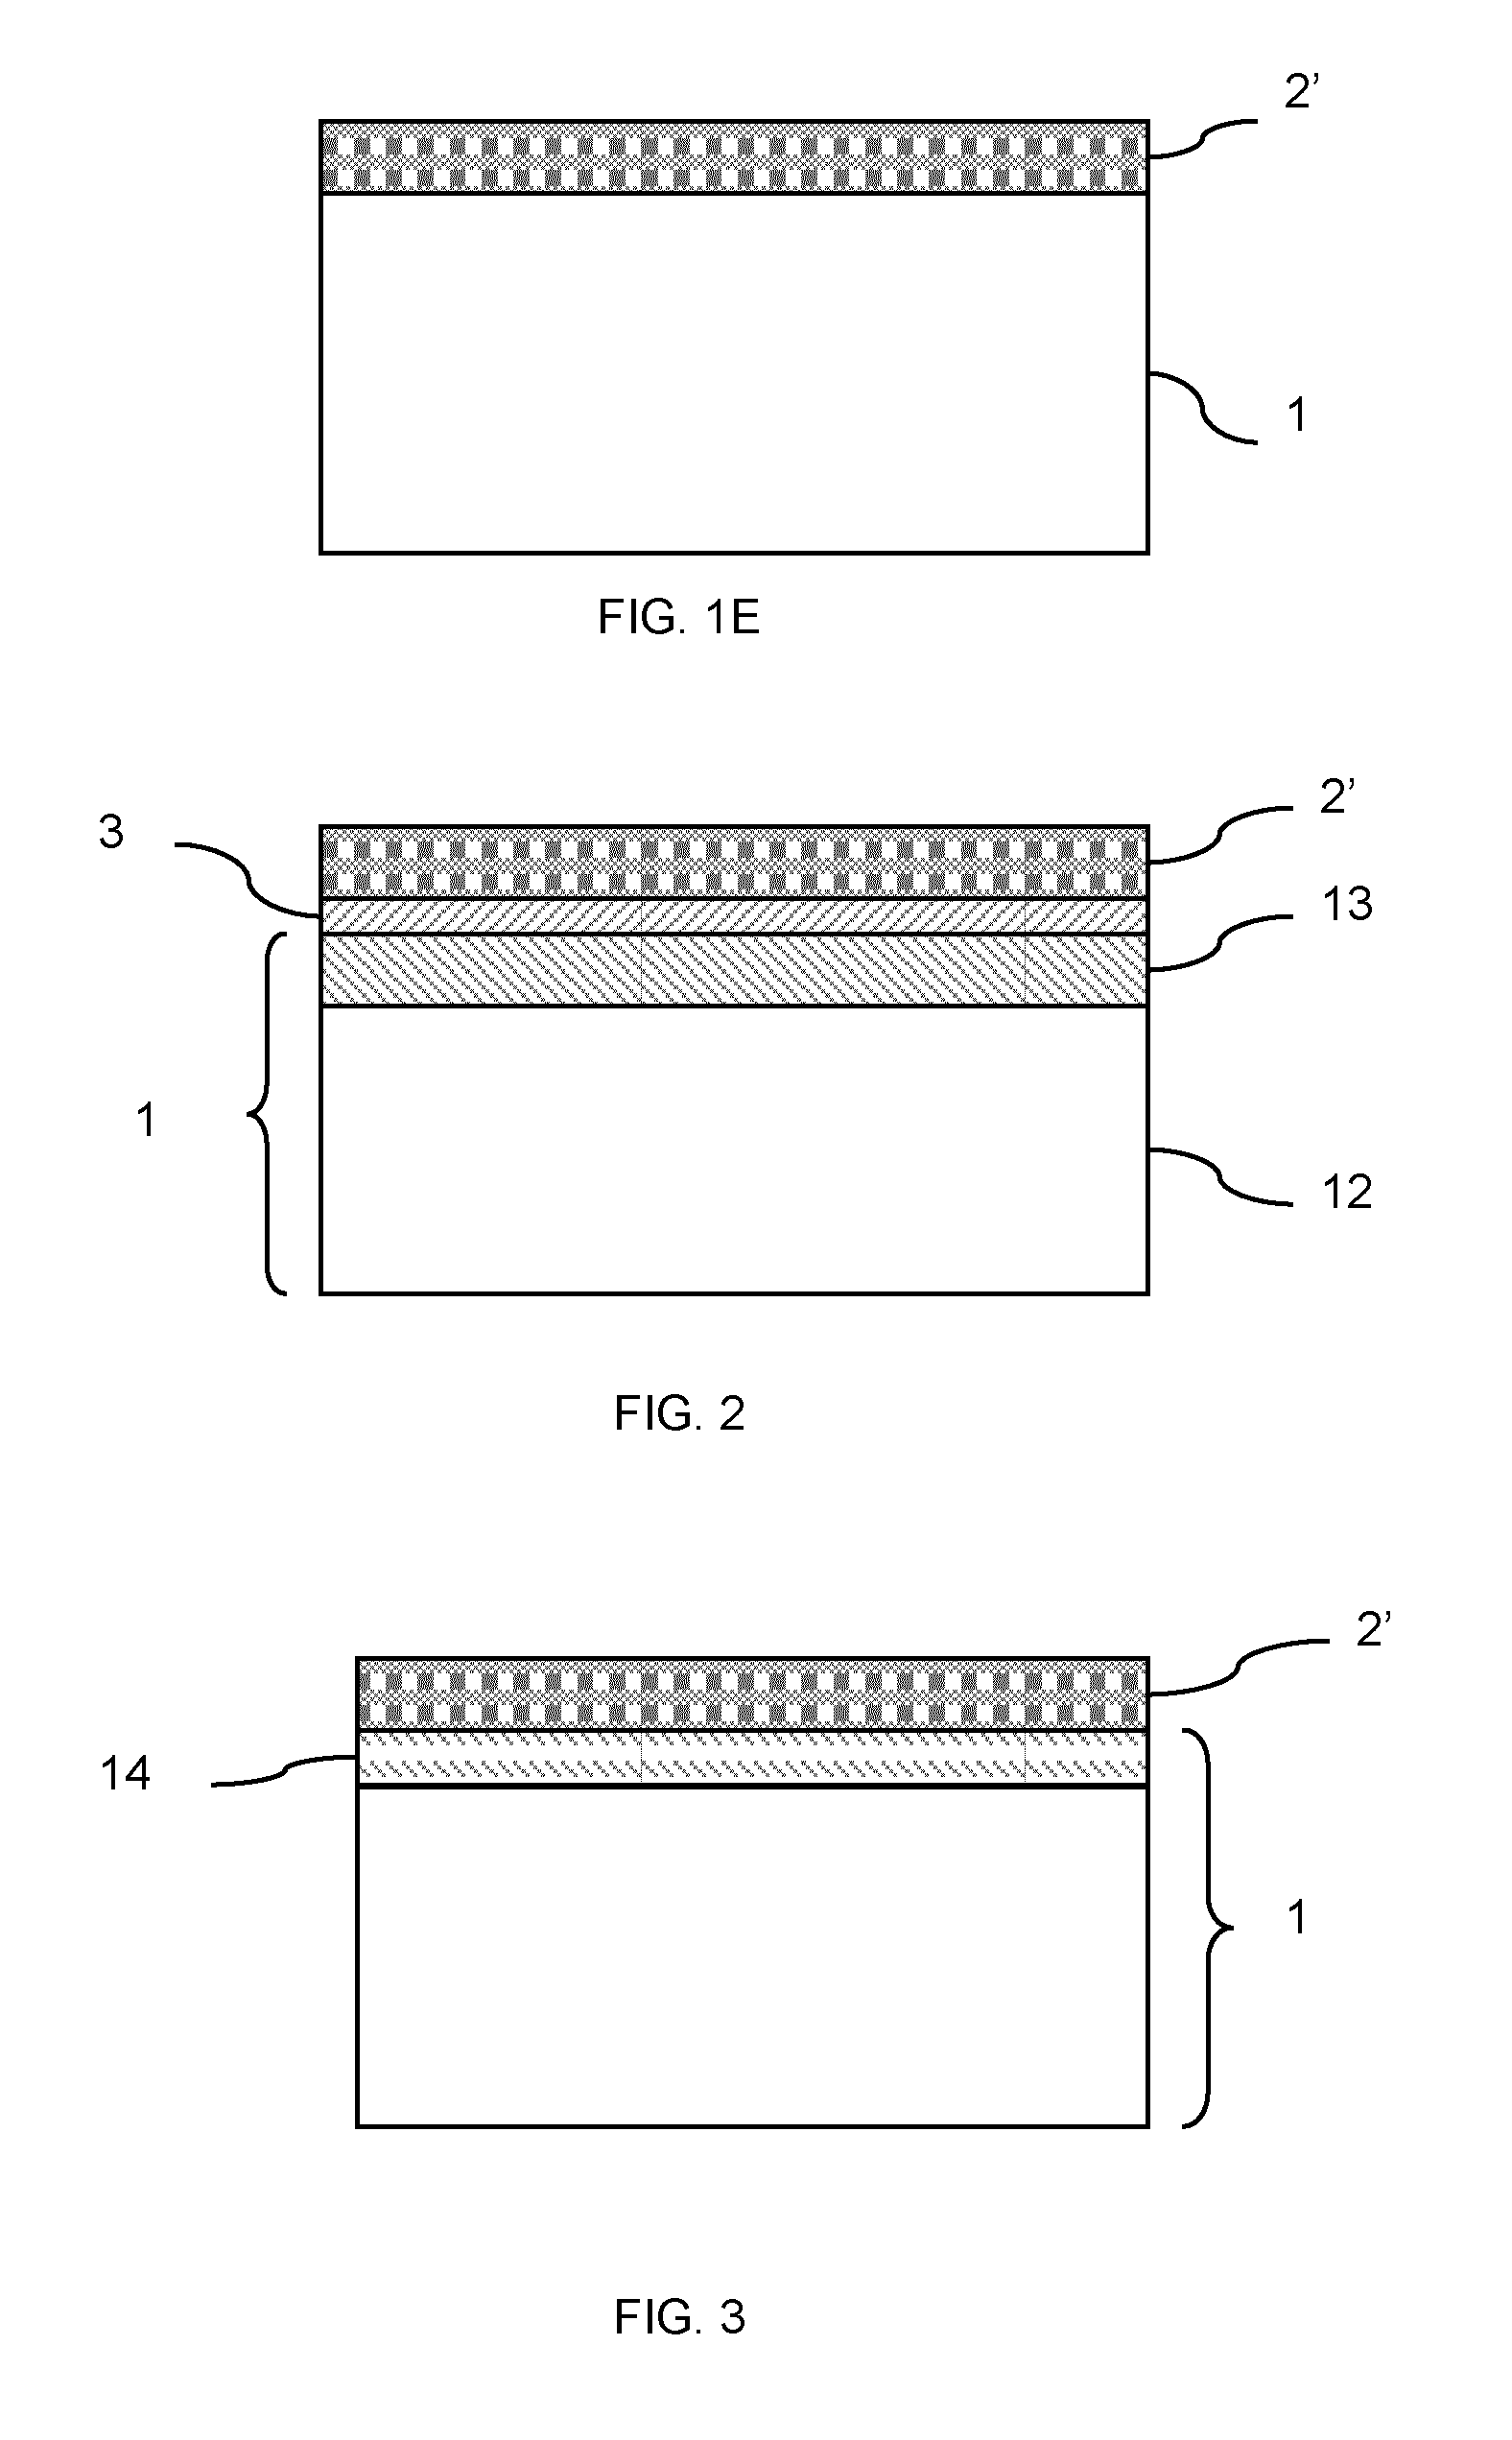 Electronic device for radiofrequency or power applications and process for manufacturing such a device